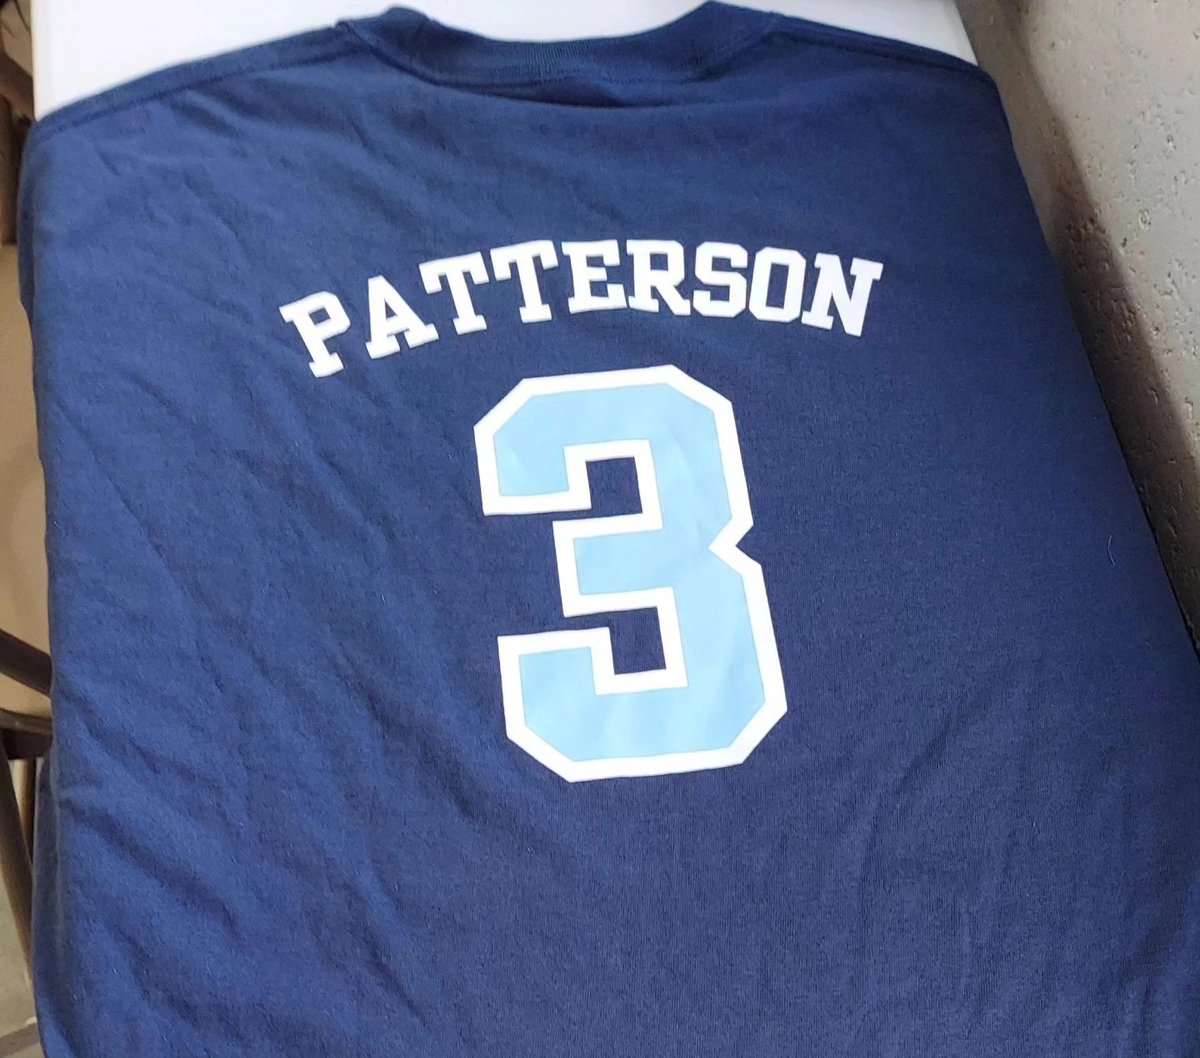 Yesterday, the team honored one of our all-time greats Steven Patterson and wore special t-shirts dedicated to his memory. His father Peter throw out the first pitch at our DH against CCNY. #d3baseball